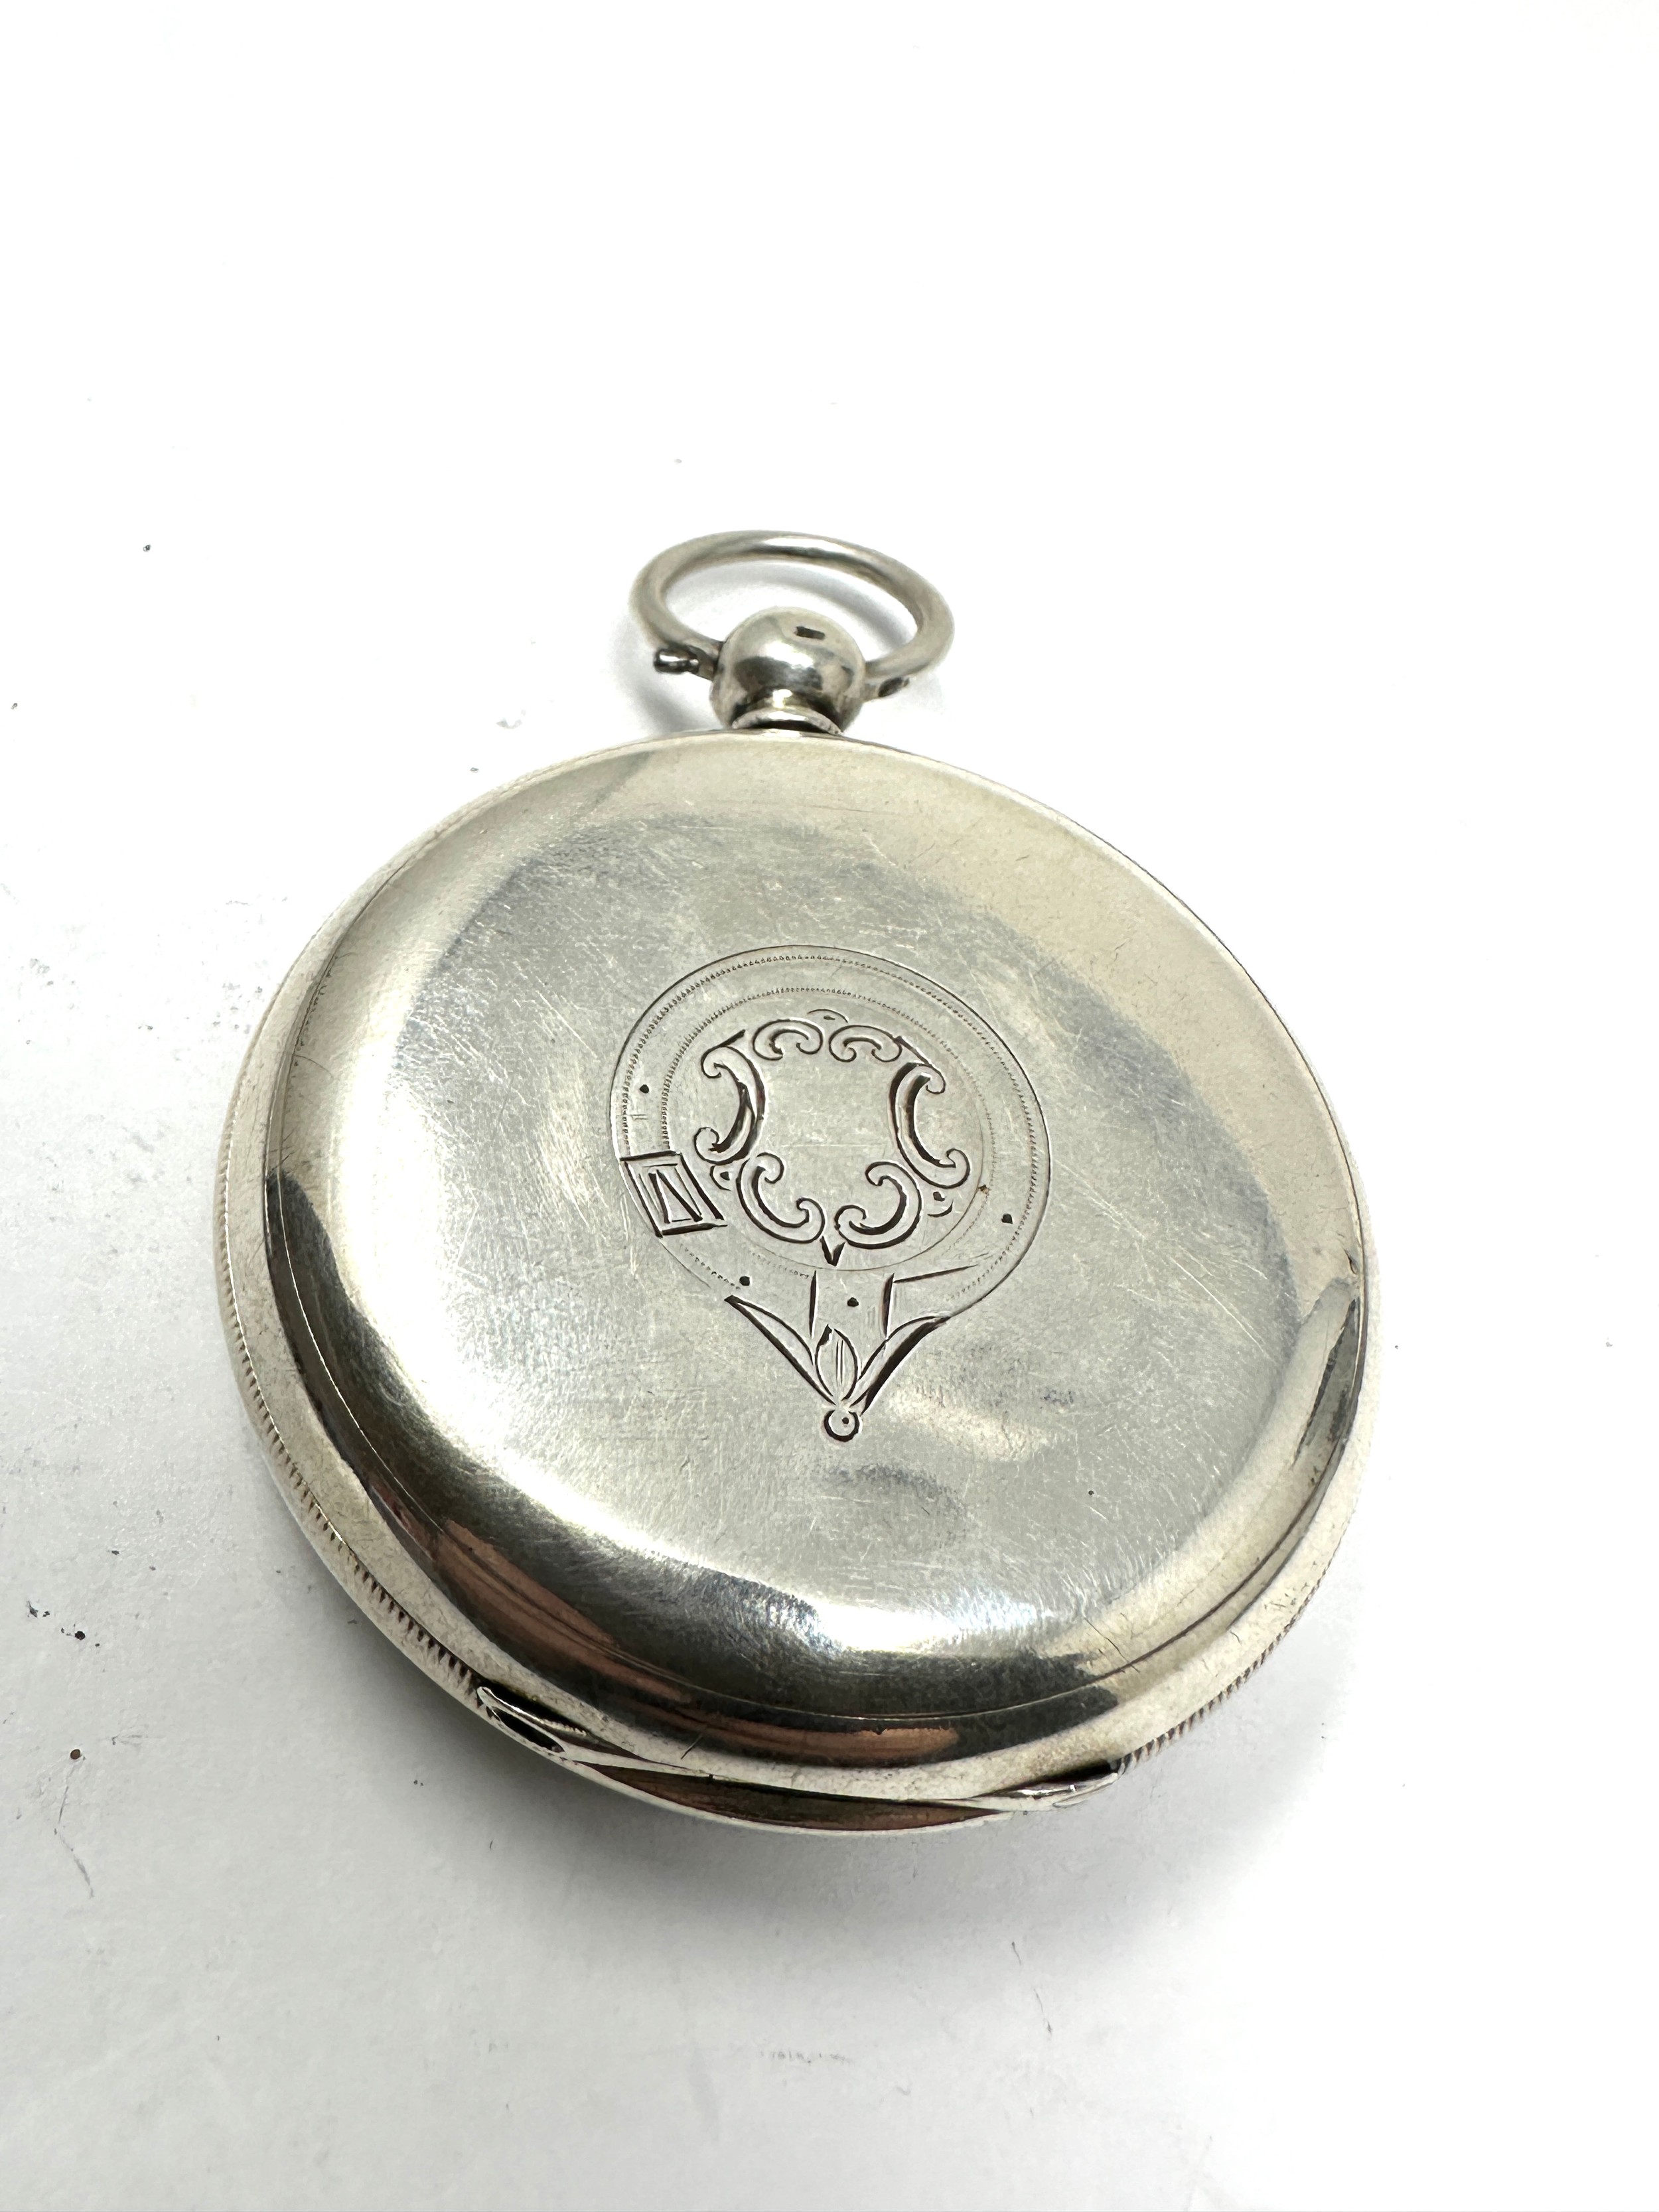 STERLING SILVER Cased Gents Antique Fusee POCKET WATCH Key-wind WORKING damage to dial - Image 2 of 4